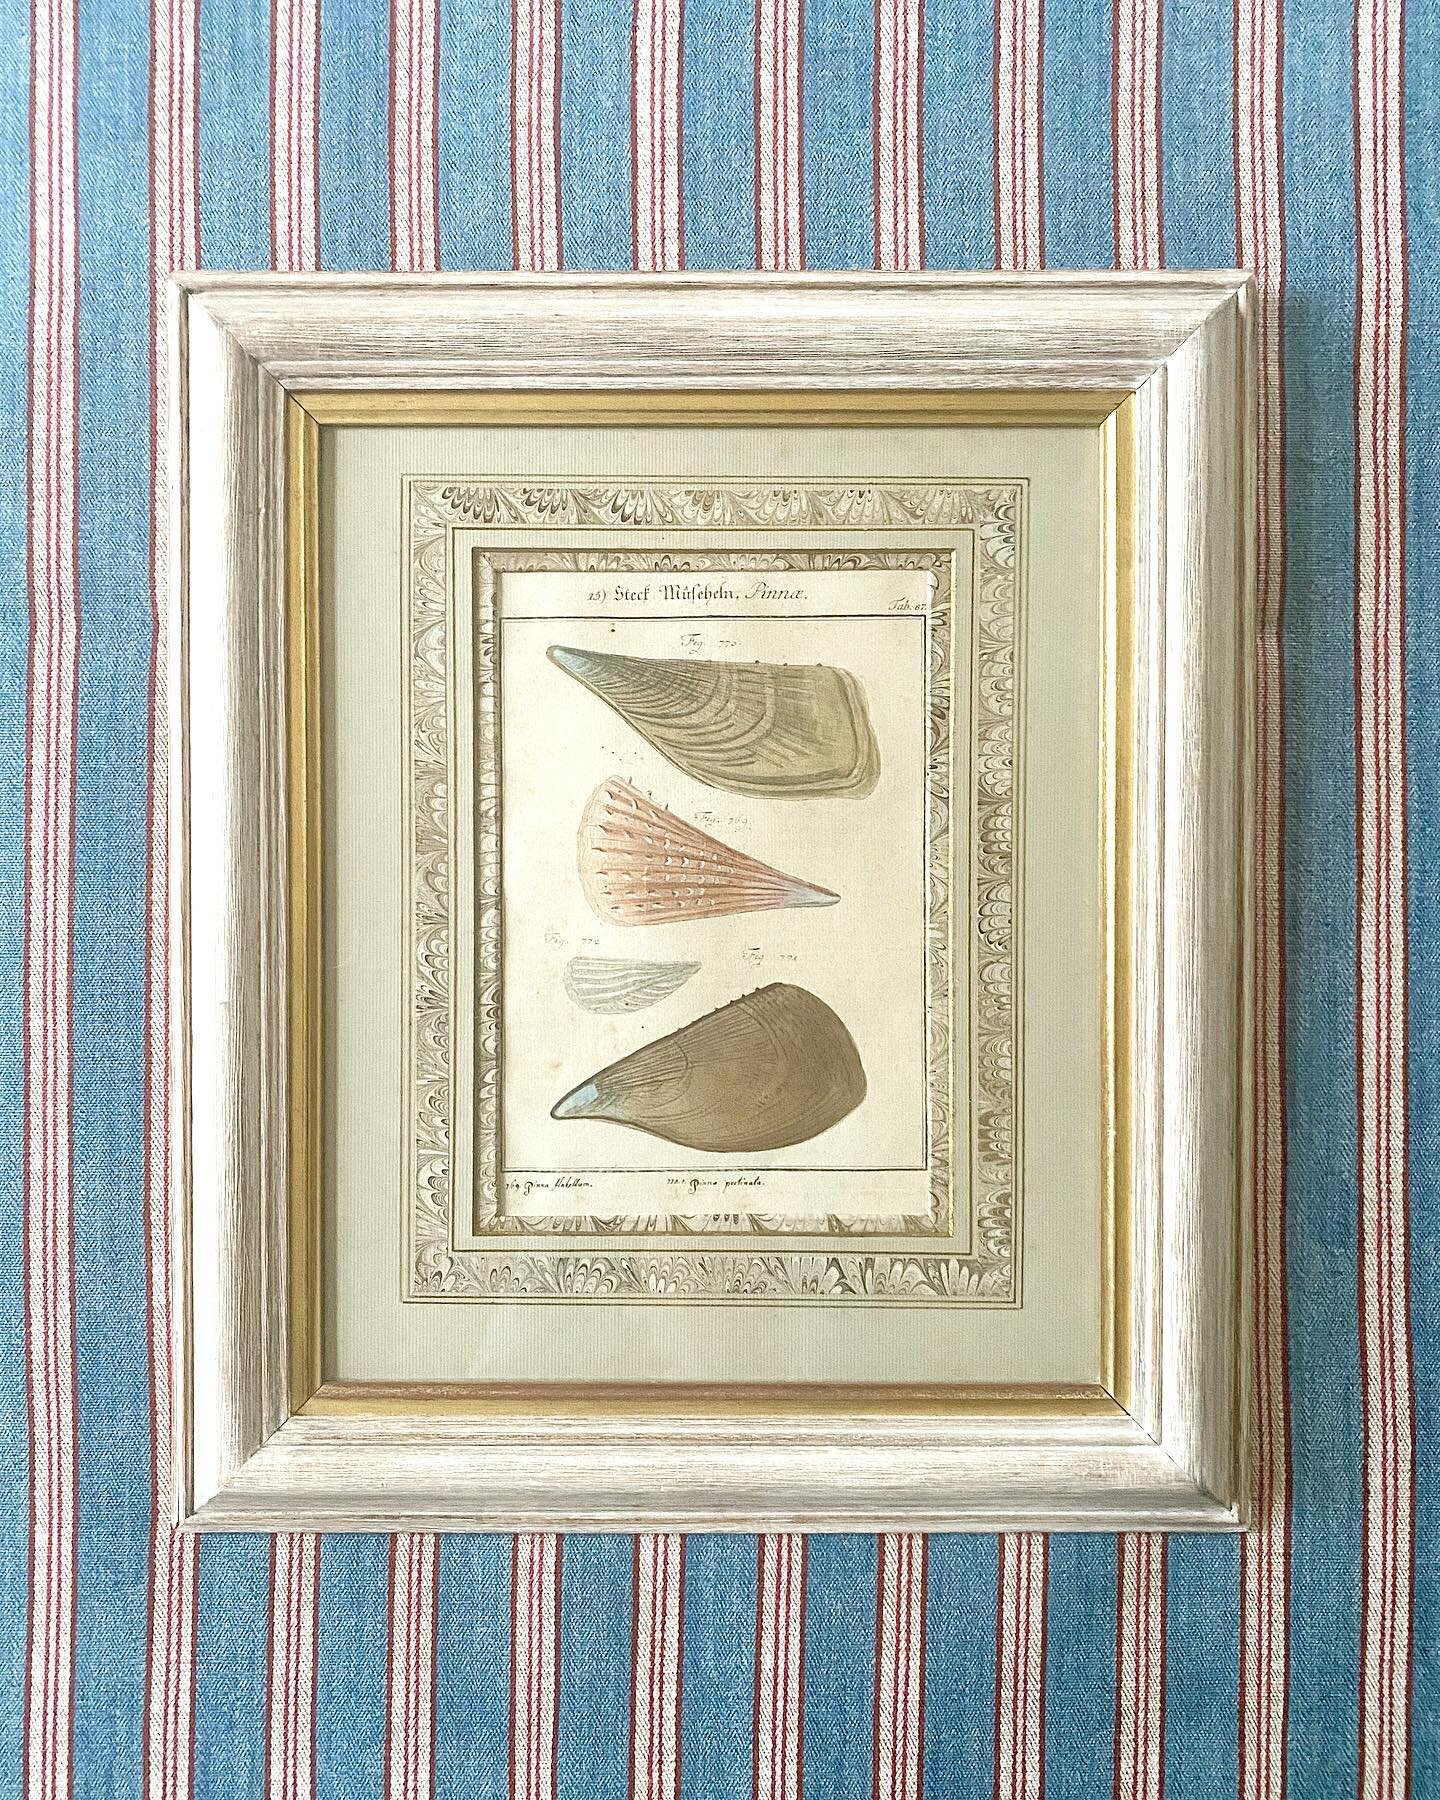 Antique coloured shell engravings ~ I don&rsquo;t know what I love more, the engravings or the beautiful marbleized bordered mount 😍 Visit my online store for more info 🏷 #rococointeriors #finds #treasuretrove #antiques #vintage #decorative #artwor